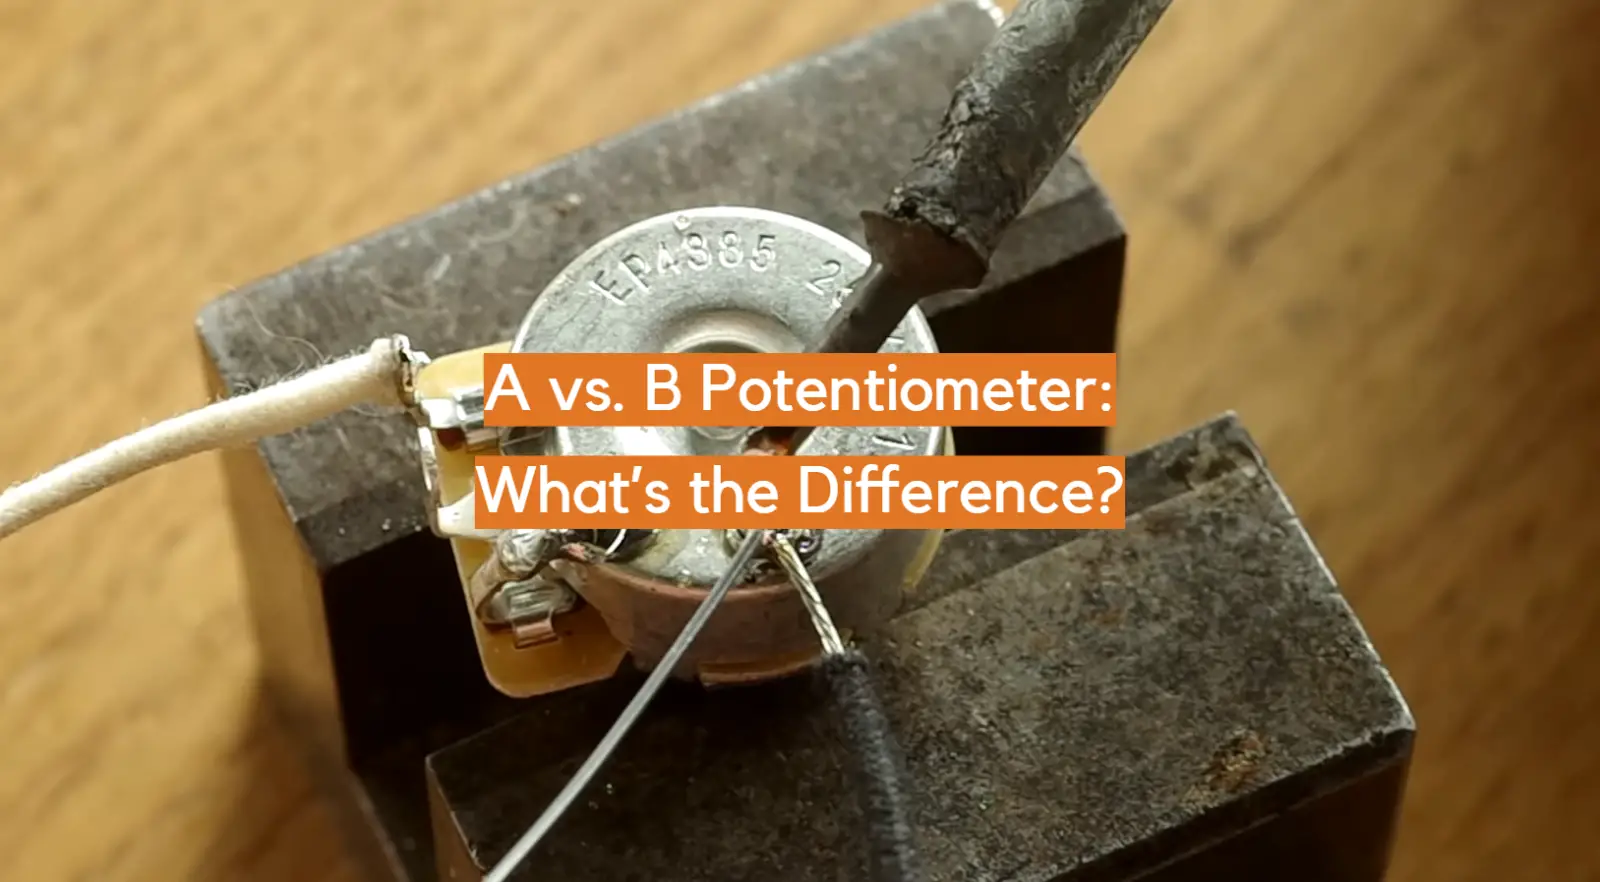 A vs. B Potentiometer: What’s the Difference?